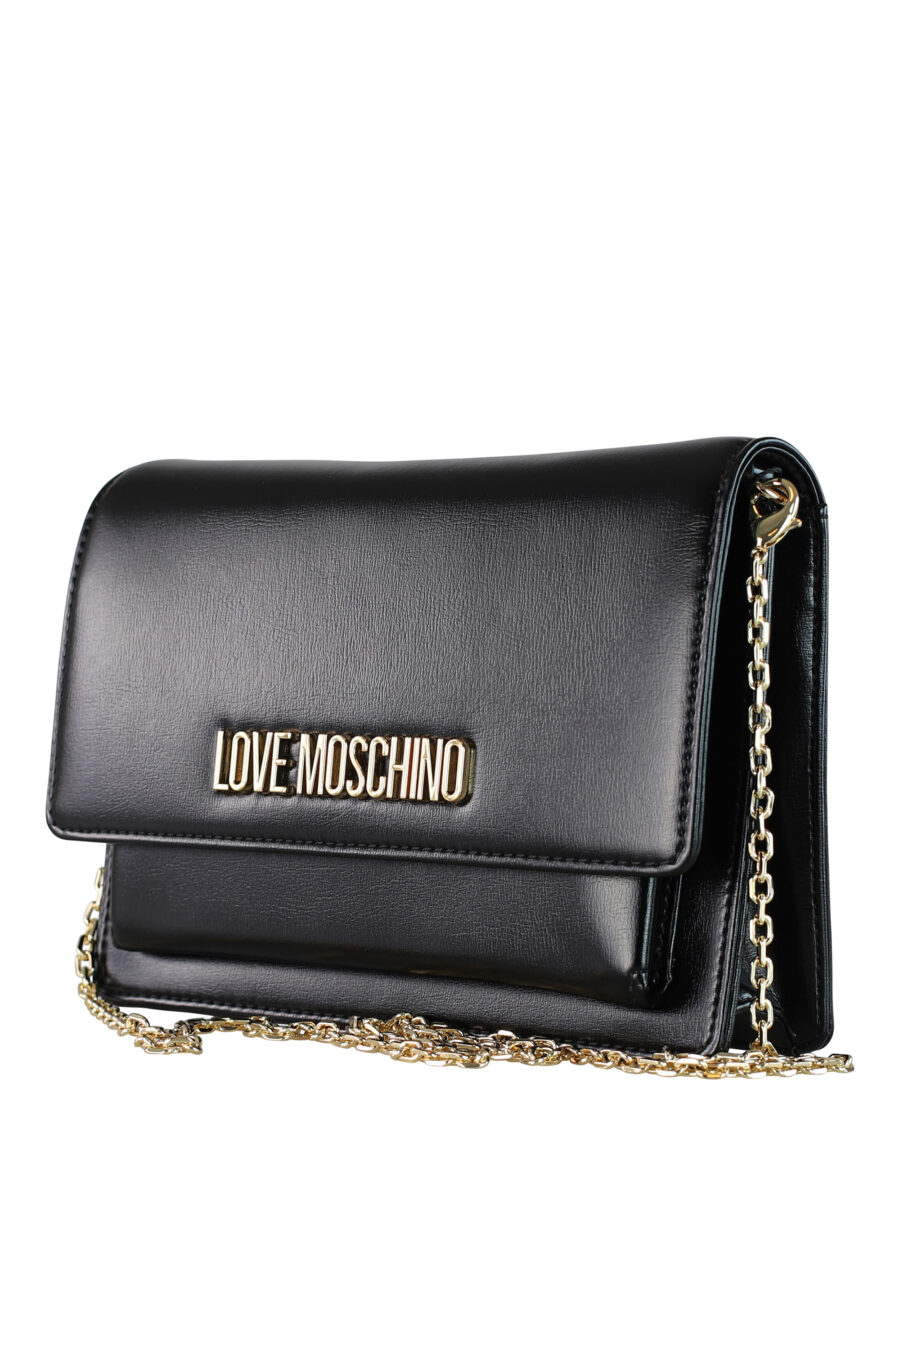 Black shoulder bag with chain and mini logo - IMG 0421